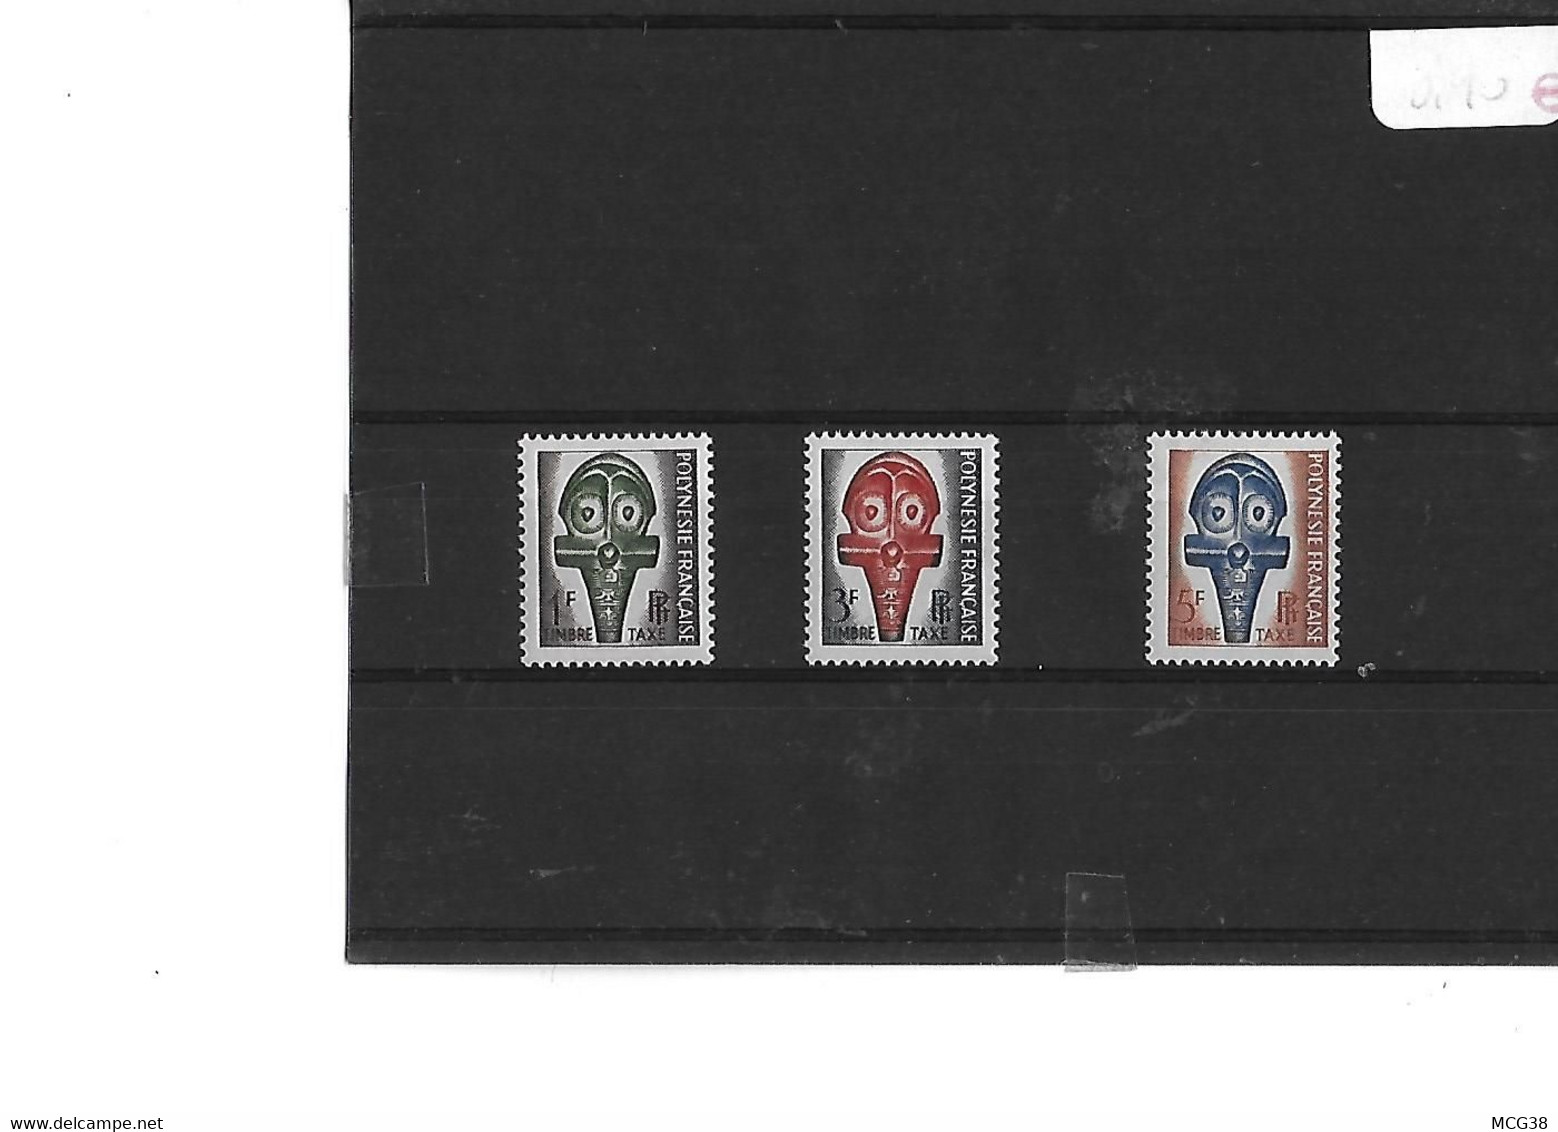 POLYNESIE  -  TIMBRES  TAXE  NEUFS  TRACE  CHARNIERE  -  SERIE   N°  1    à  3 - Postage Due